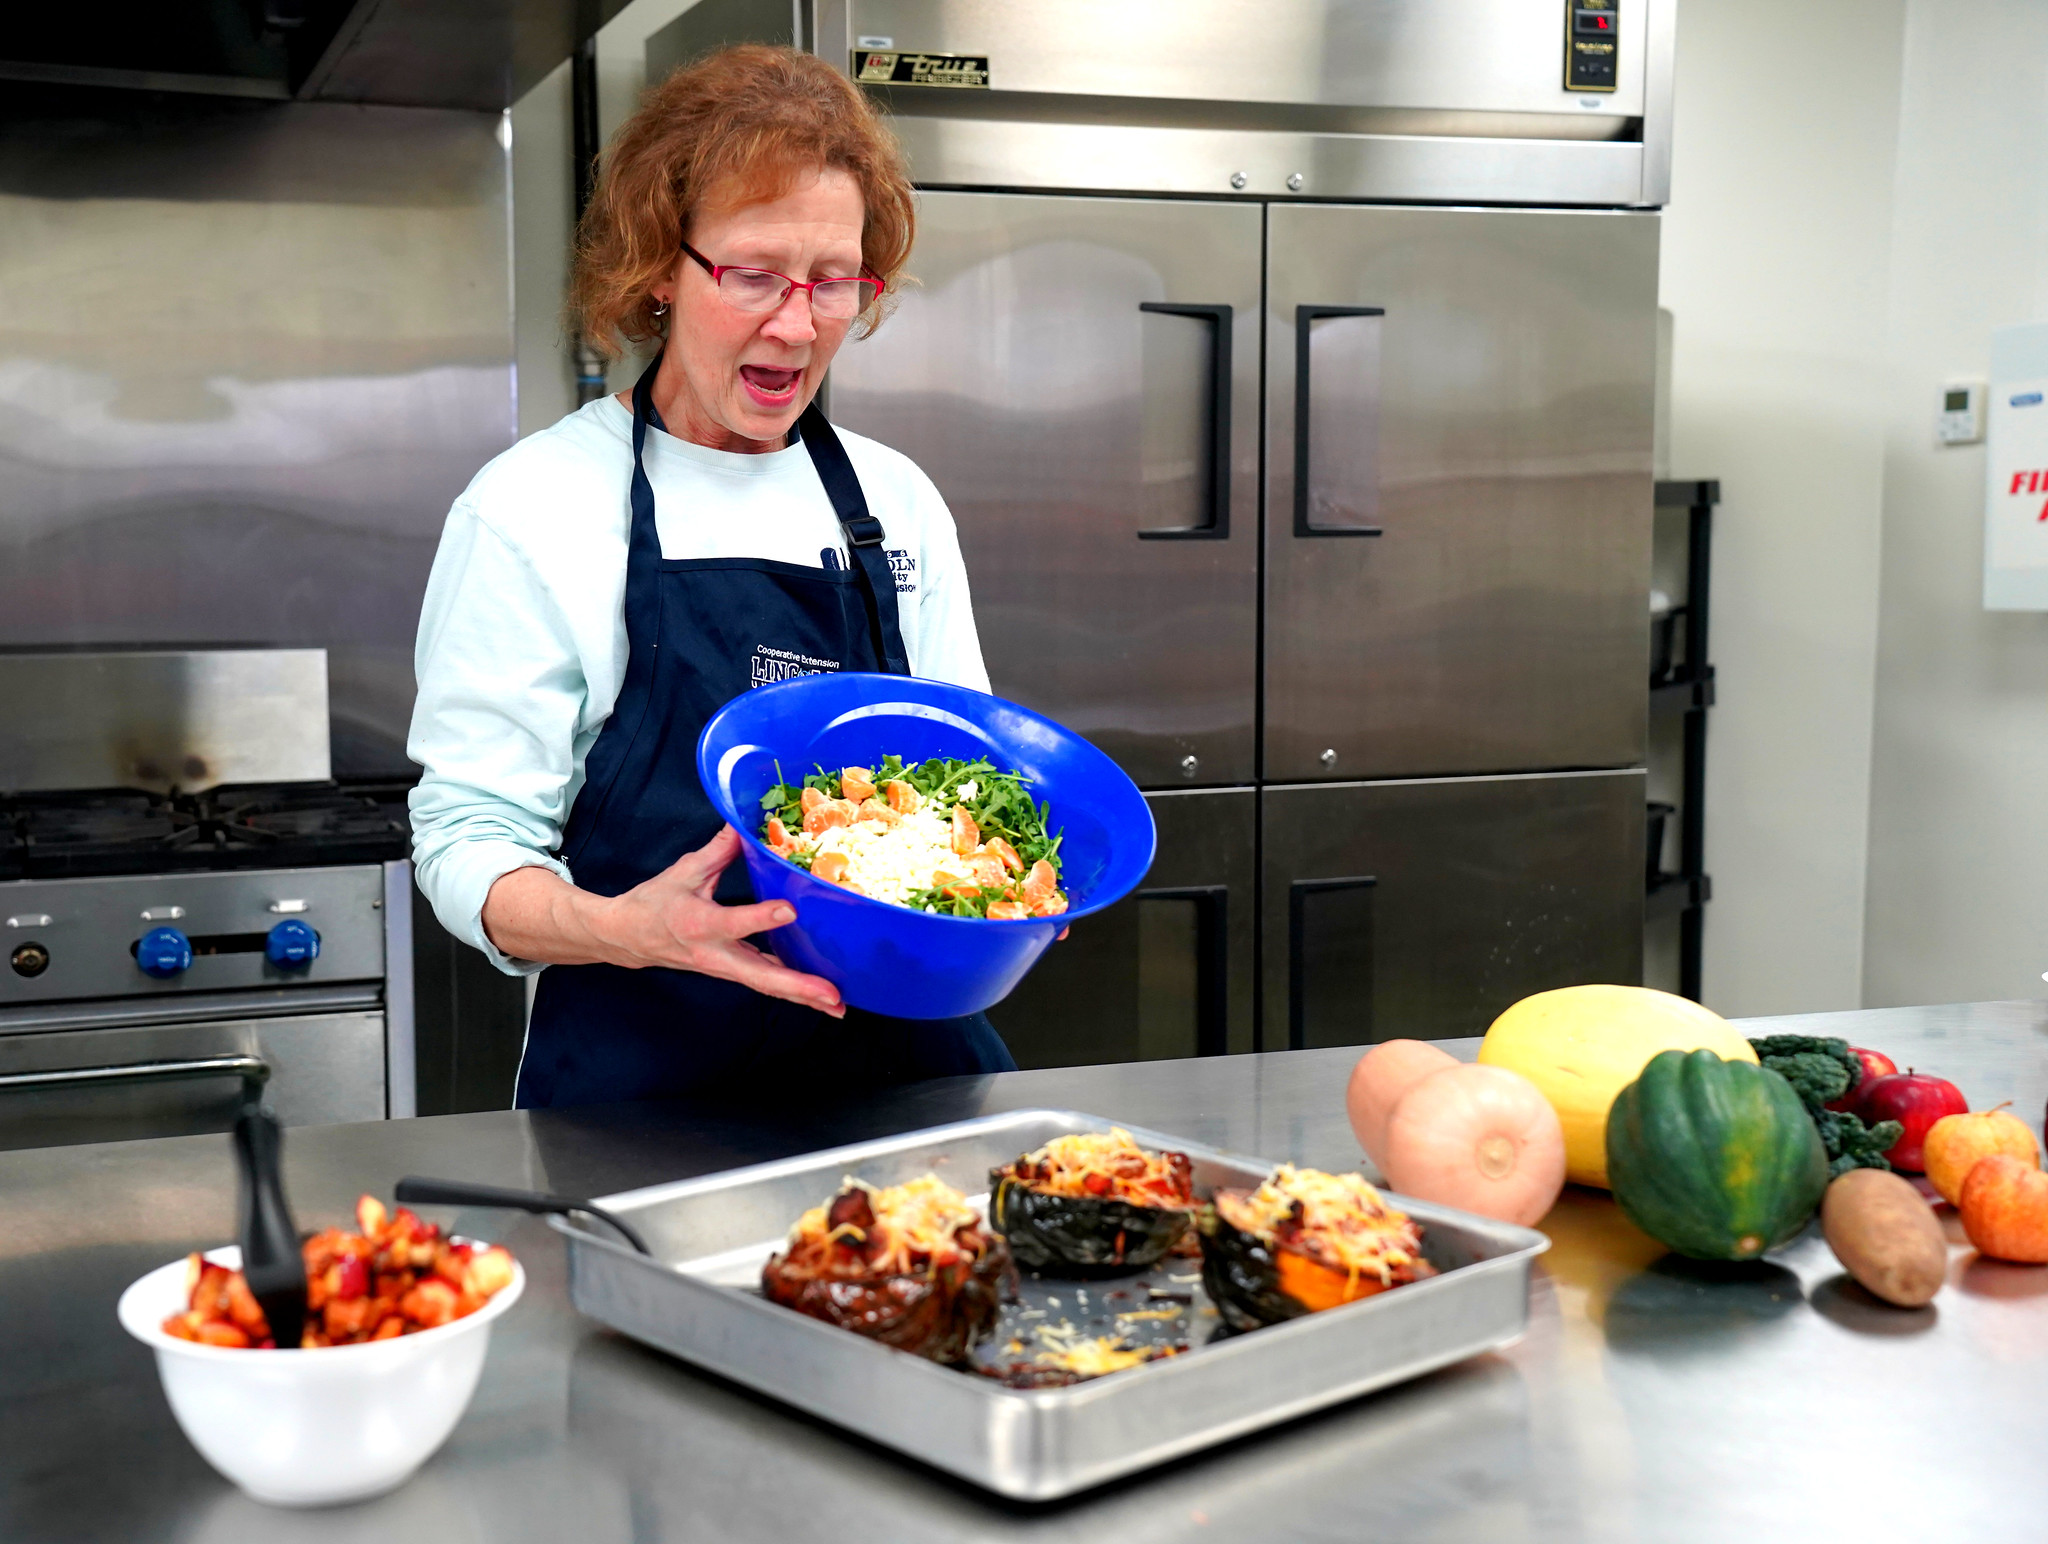 Sarah Eber, LUCE's human health and nutrition program coordinator, demonstrates the art of preparing a vibrant and nutritious meal during the Plant, Grow, Eat, Be Healthy workshop series.